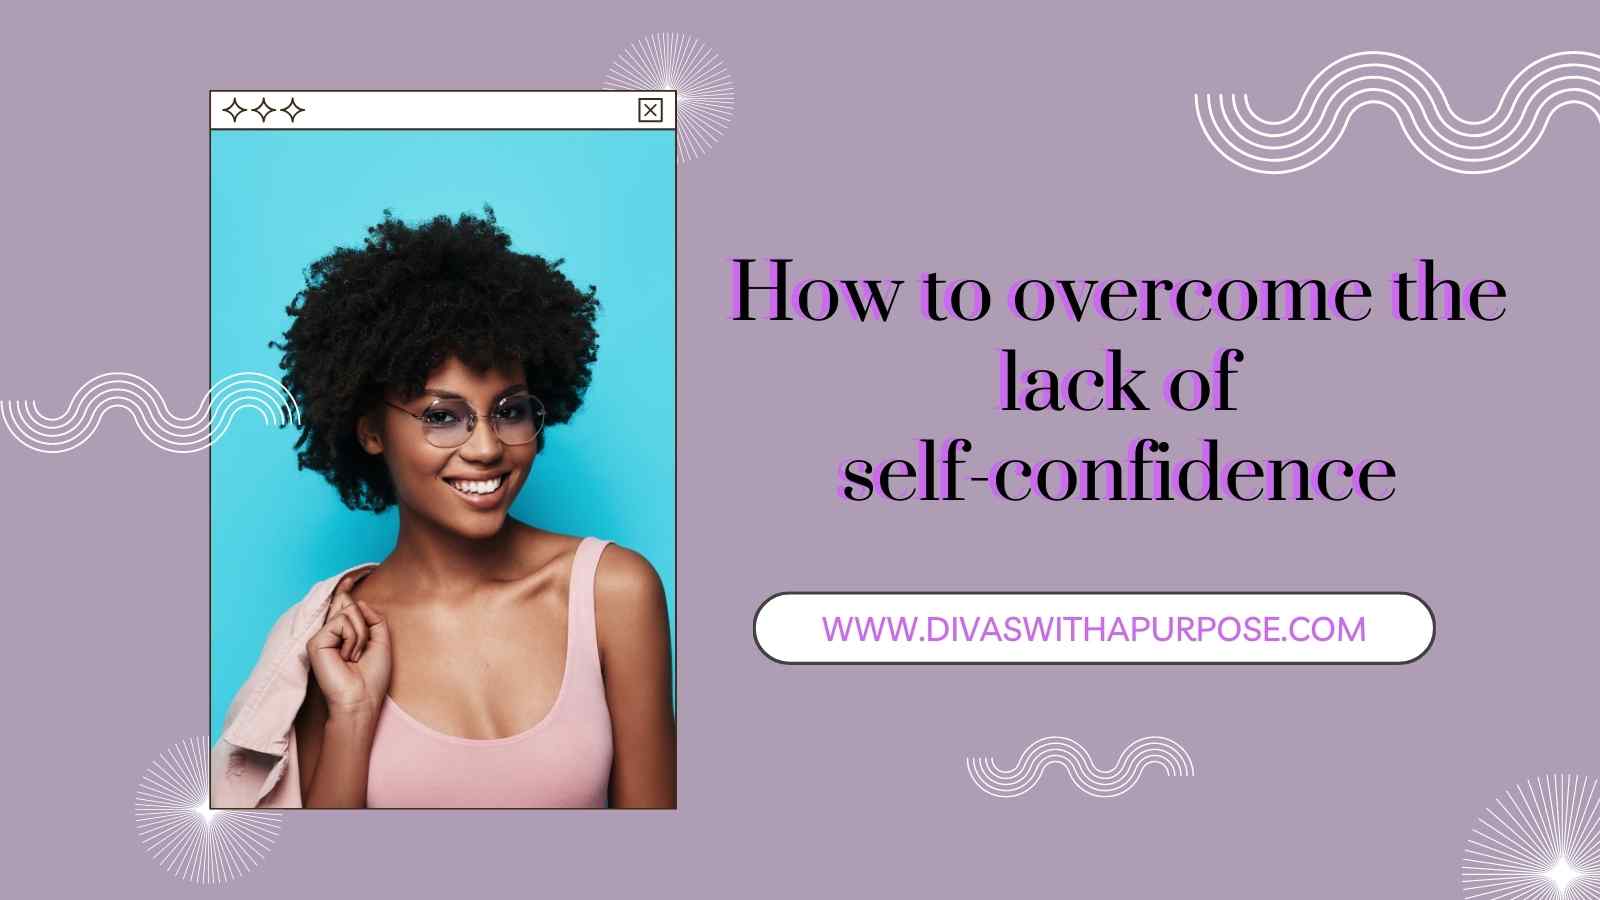 How to overcome the lack of self-confidence